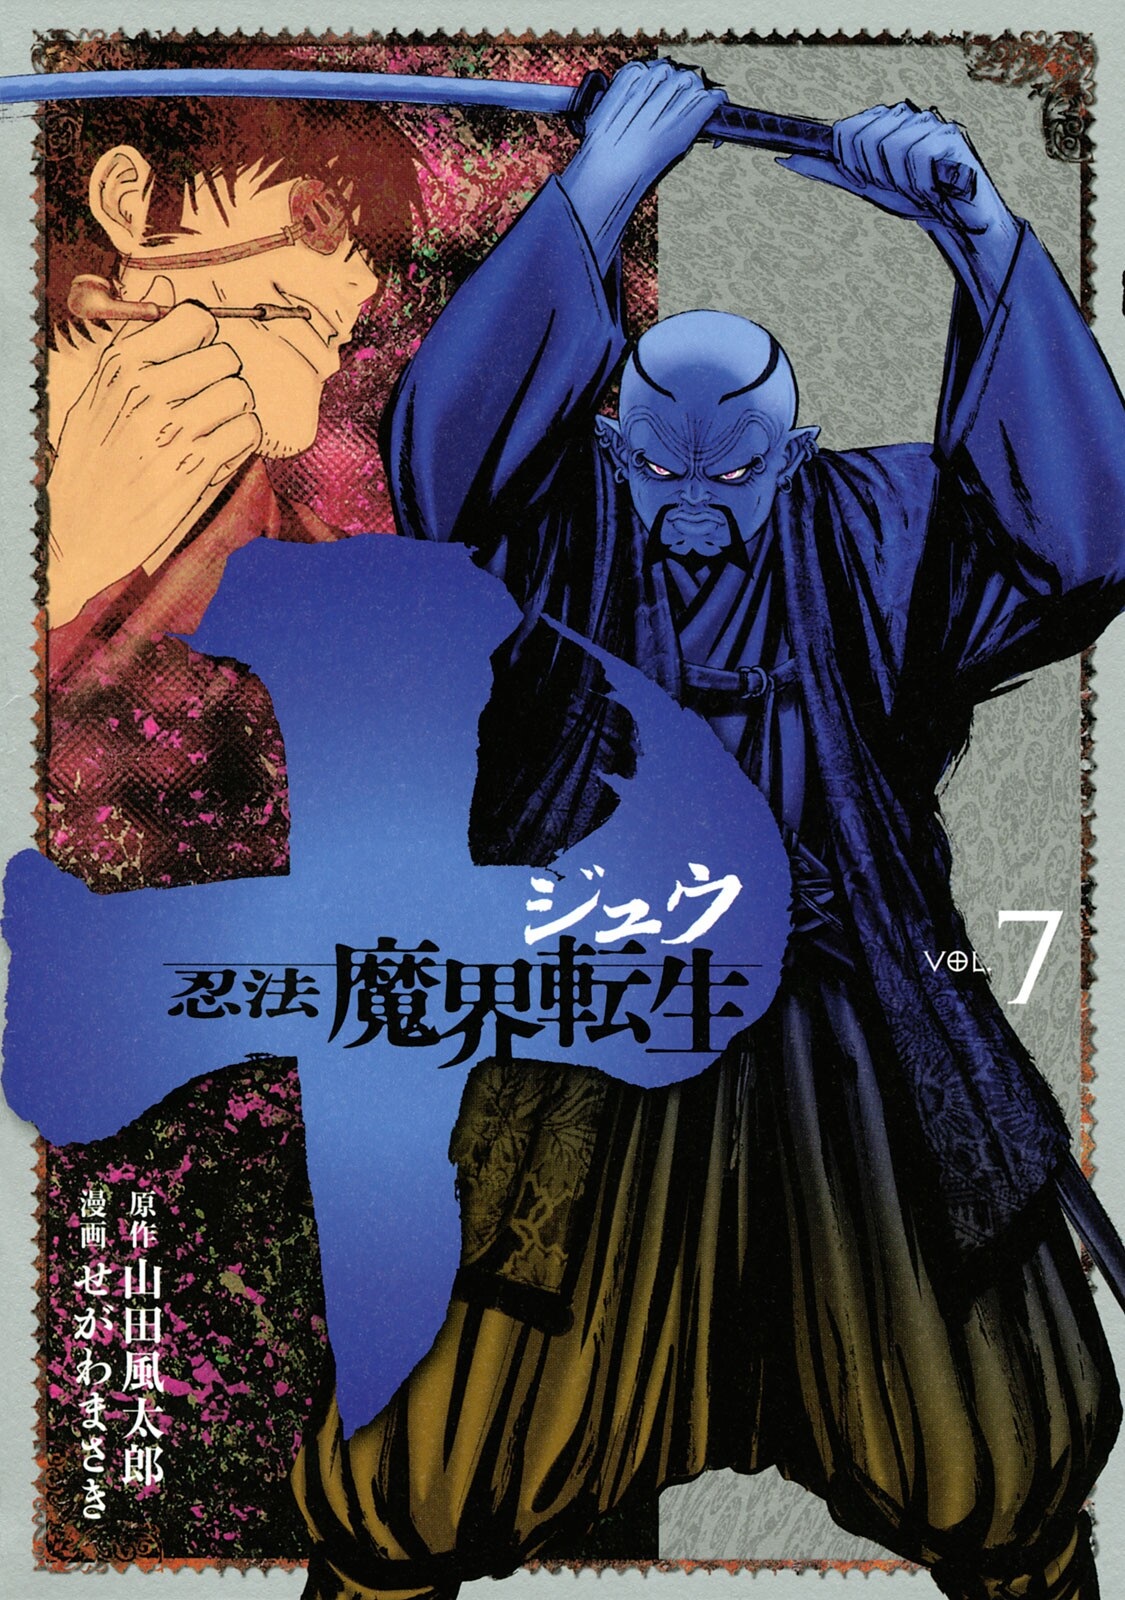 Juu - Ninpou Makai Tensei Vol.7 Chapter 29: Chapter 5 The Sound Of The Waves (Part 1) - Picture 2